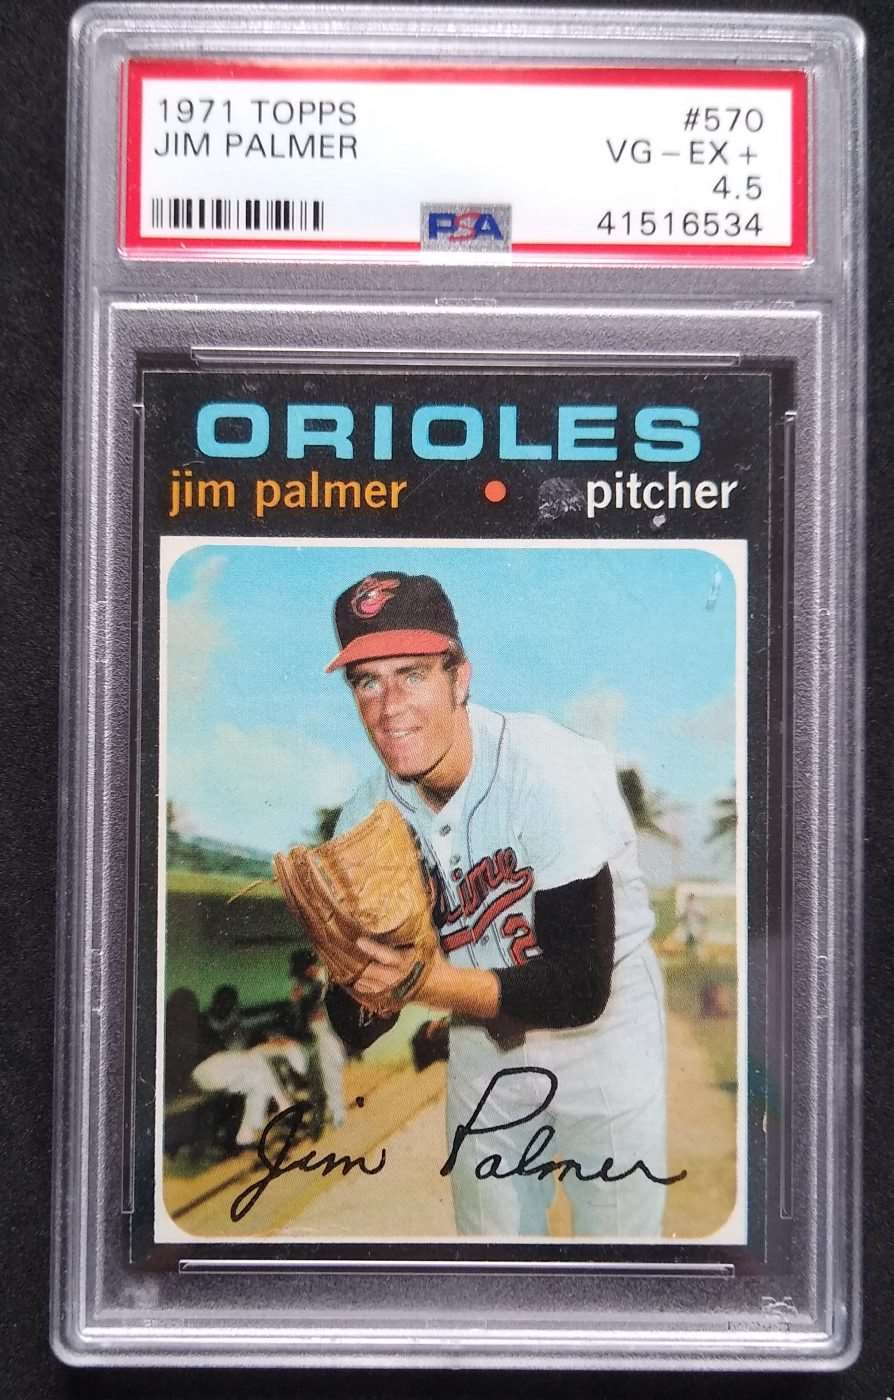 1971 Topps Jim Palmer PSA 4.5 Graded Baseball Card simple Xclusive Collectibles   